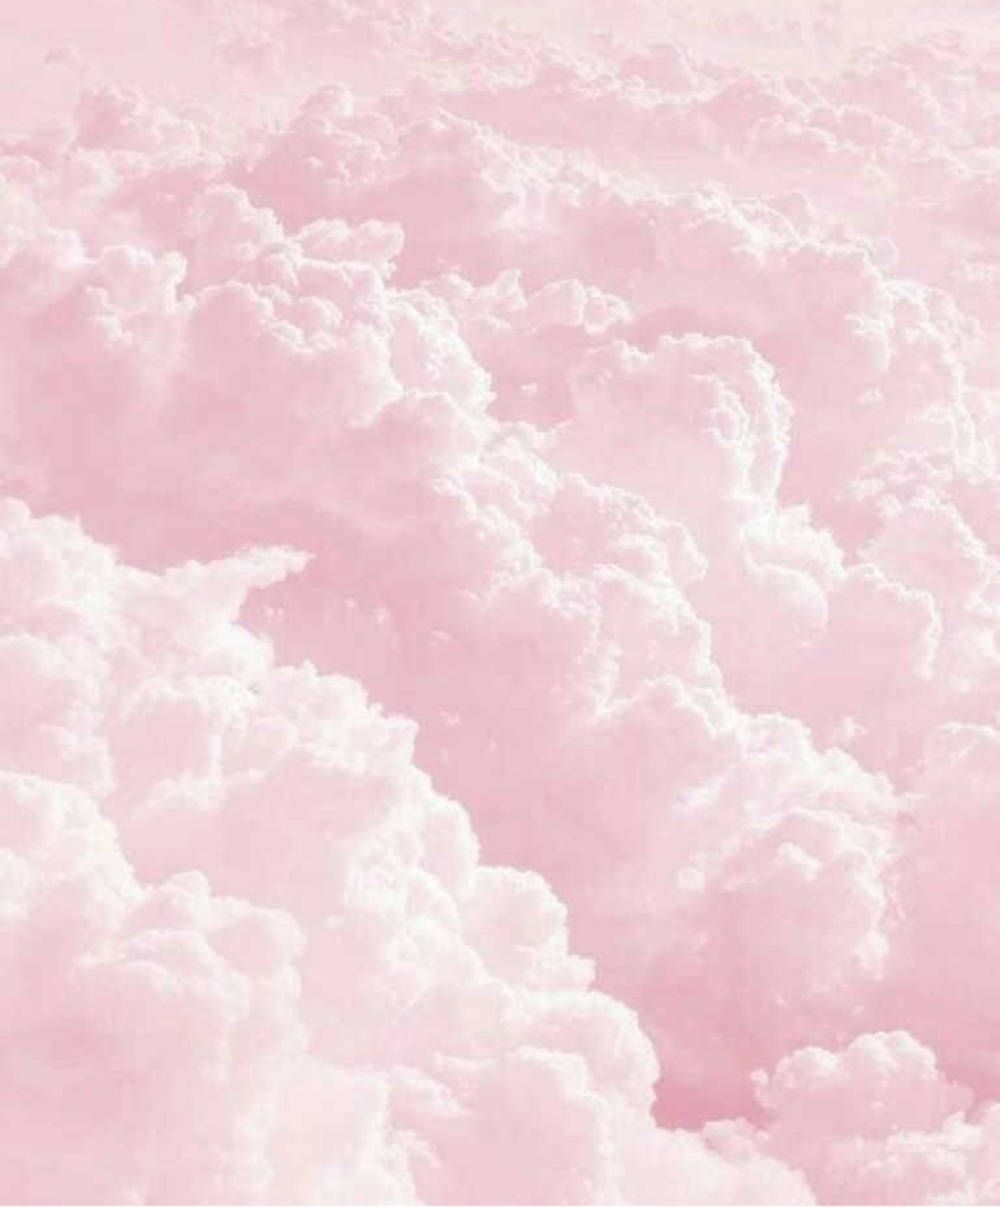 Aesthetic pink background with white clouds - Pastel pink